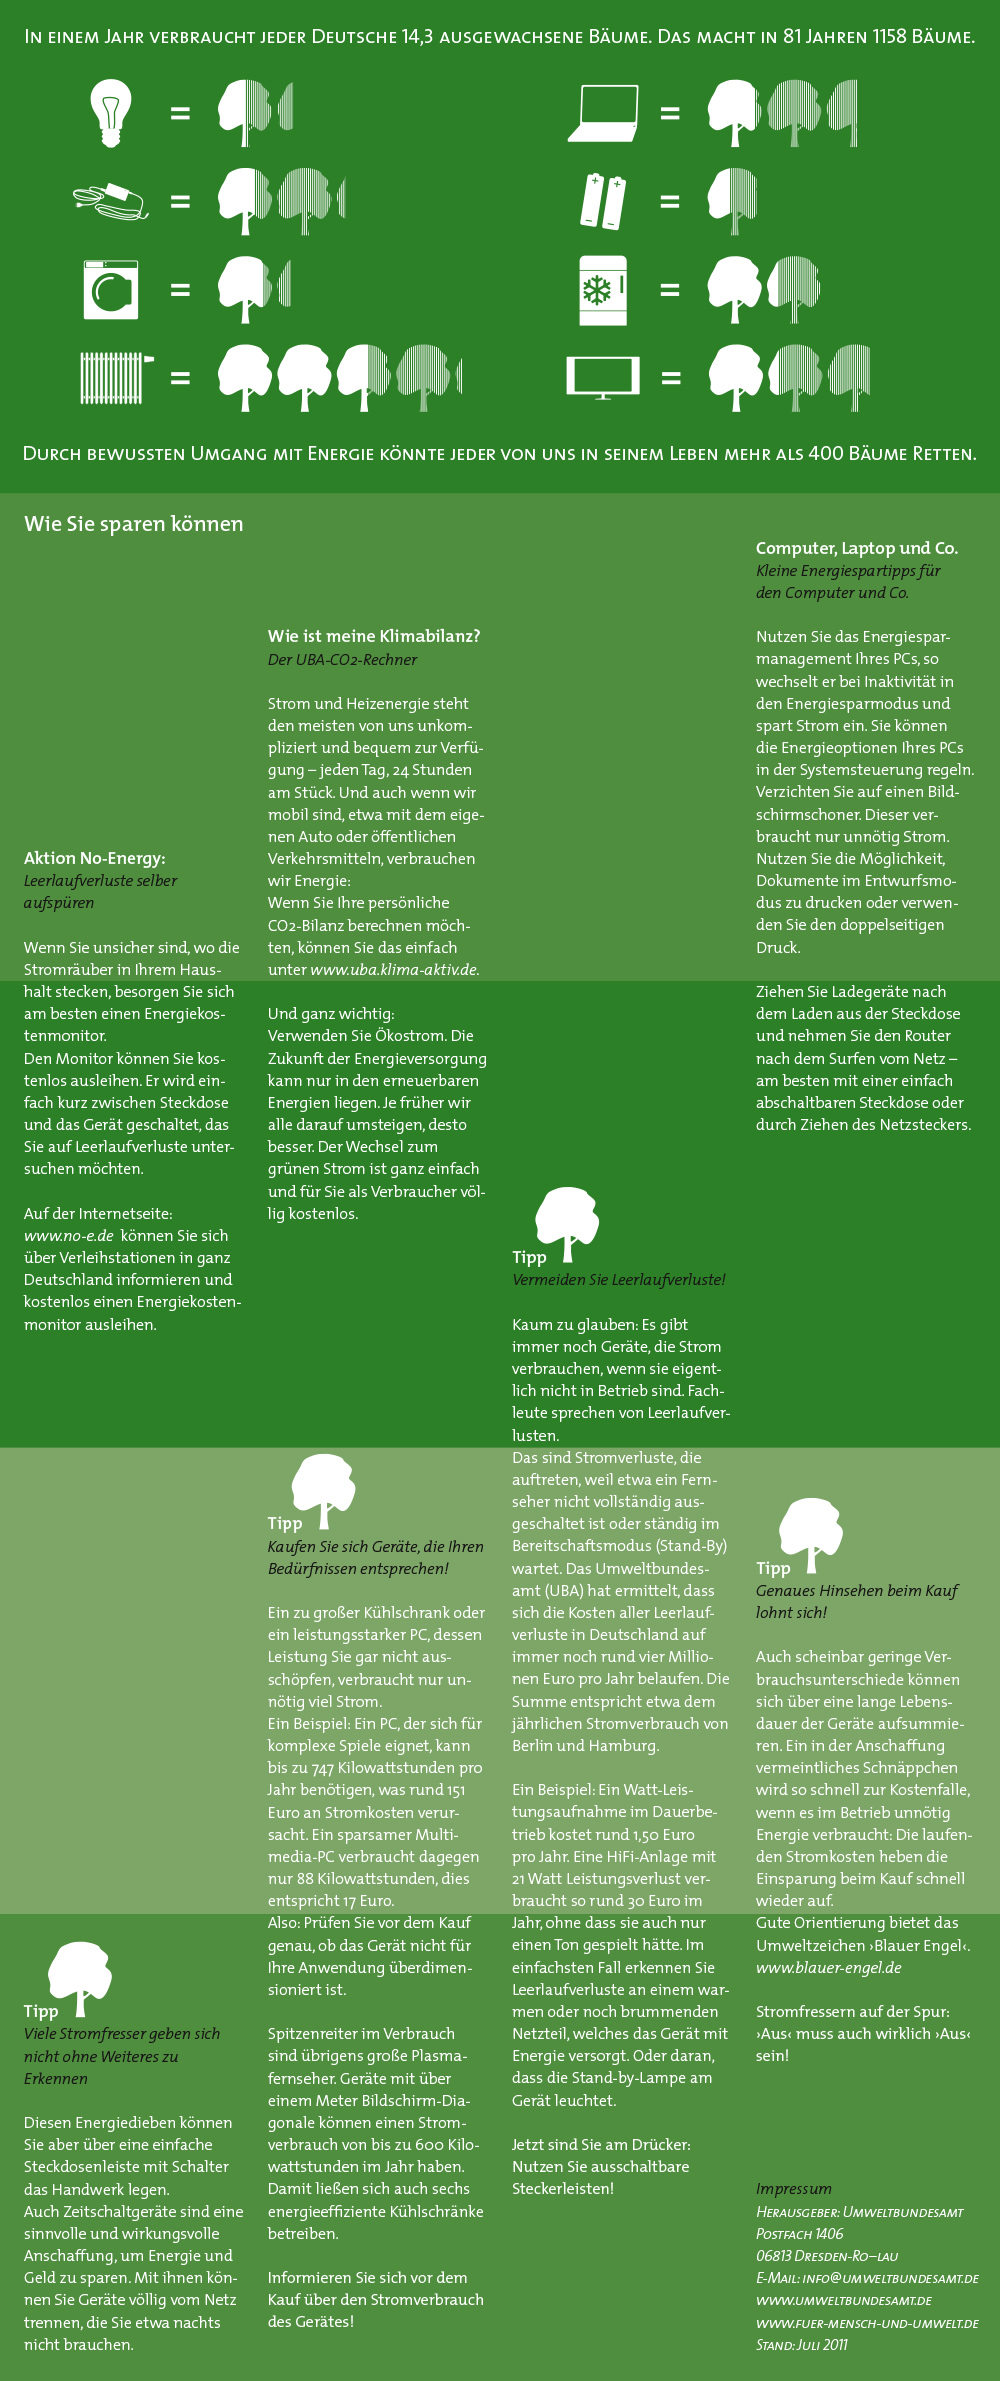 a whole leaflet showing advice on how to save energy